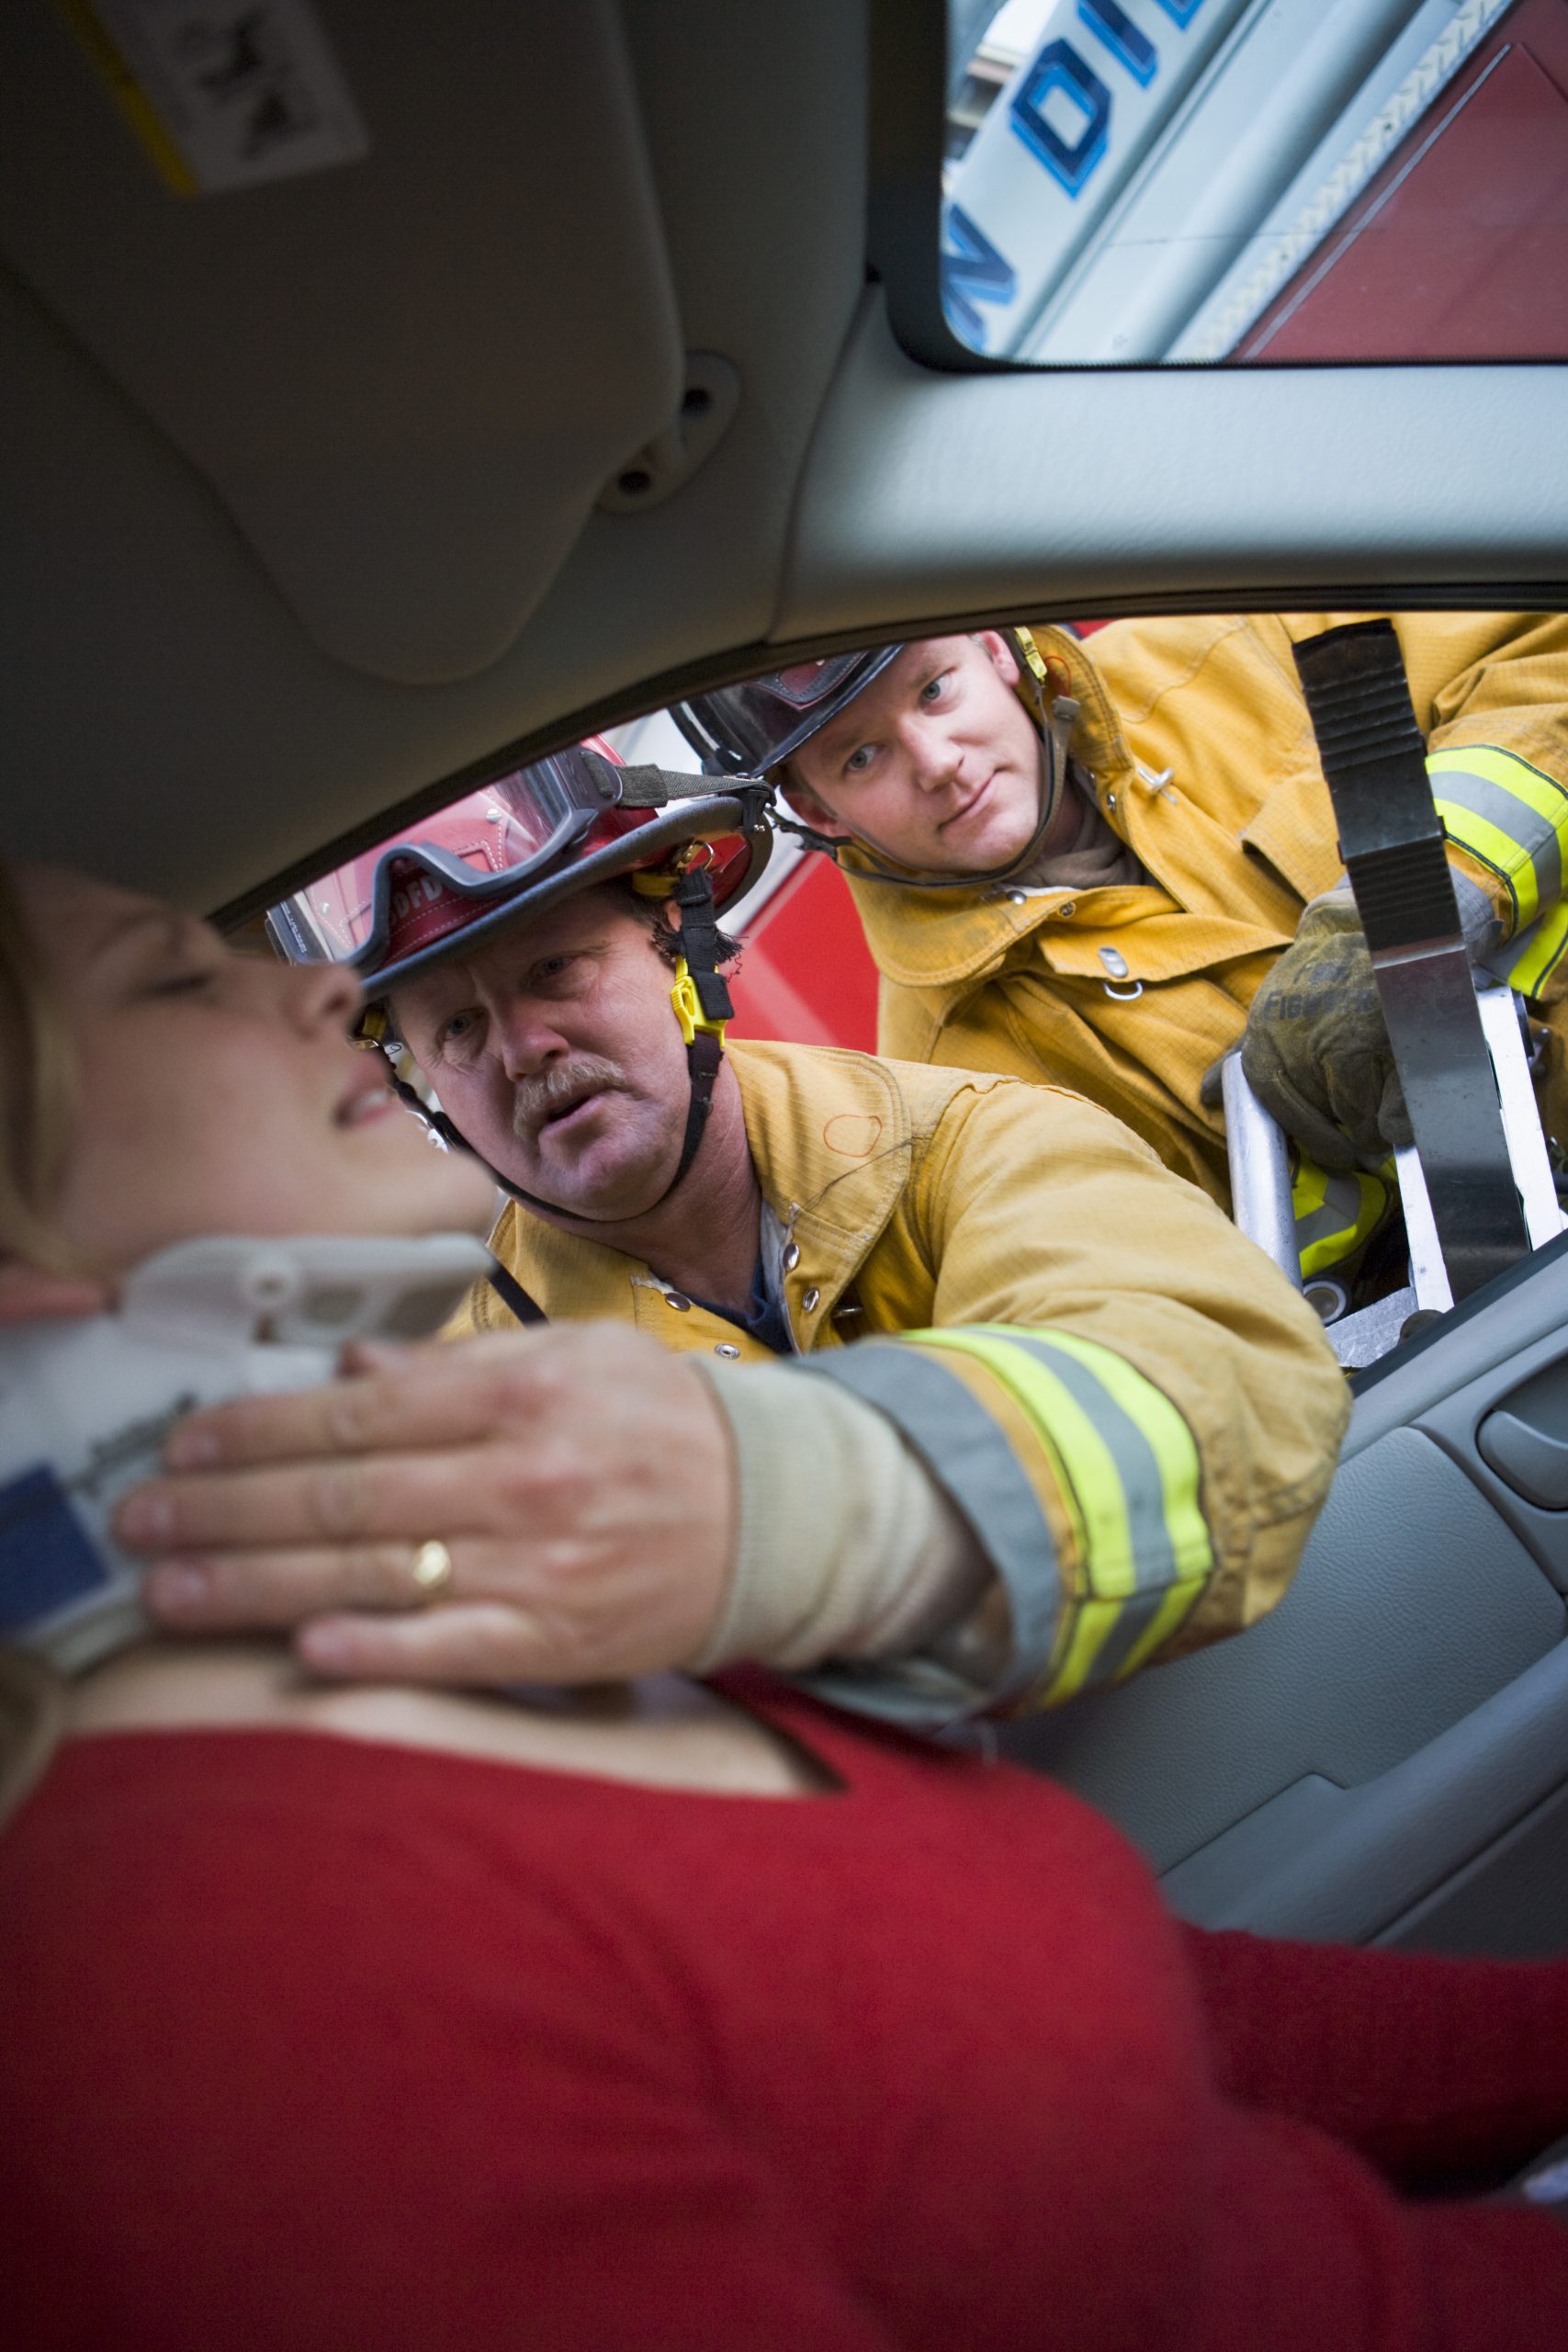 firefighters helping an injured woman in a car 2021 08 26 16 12 44 utc scaled